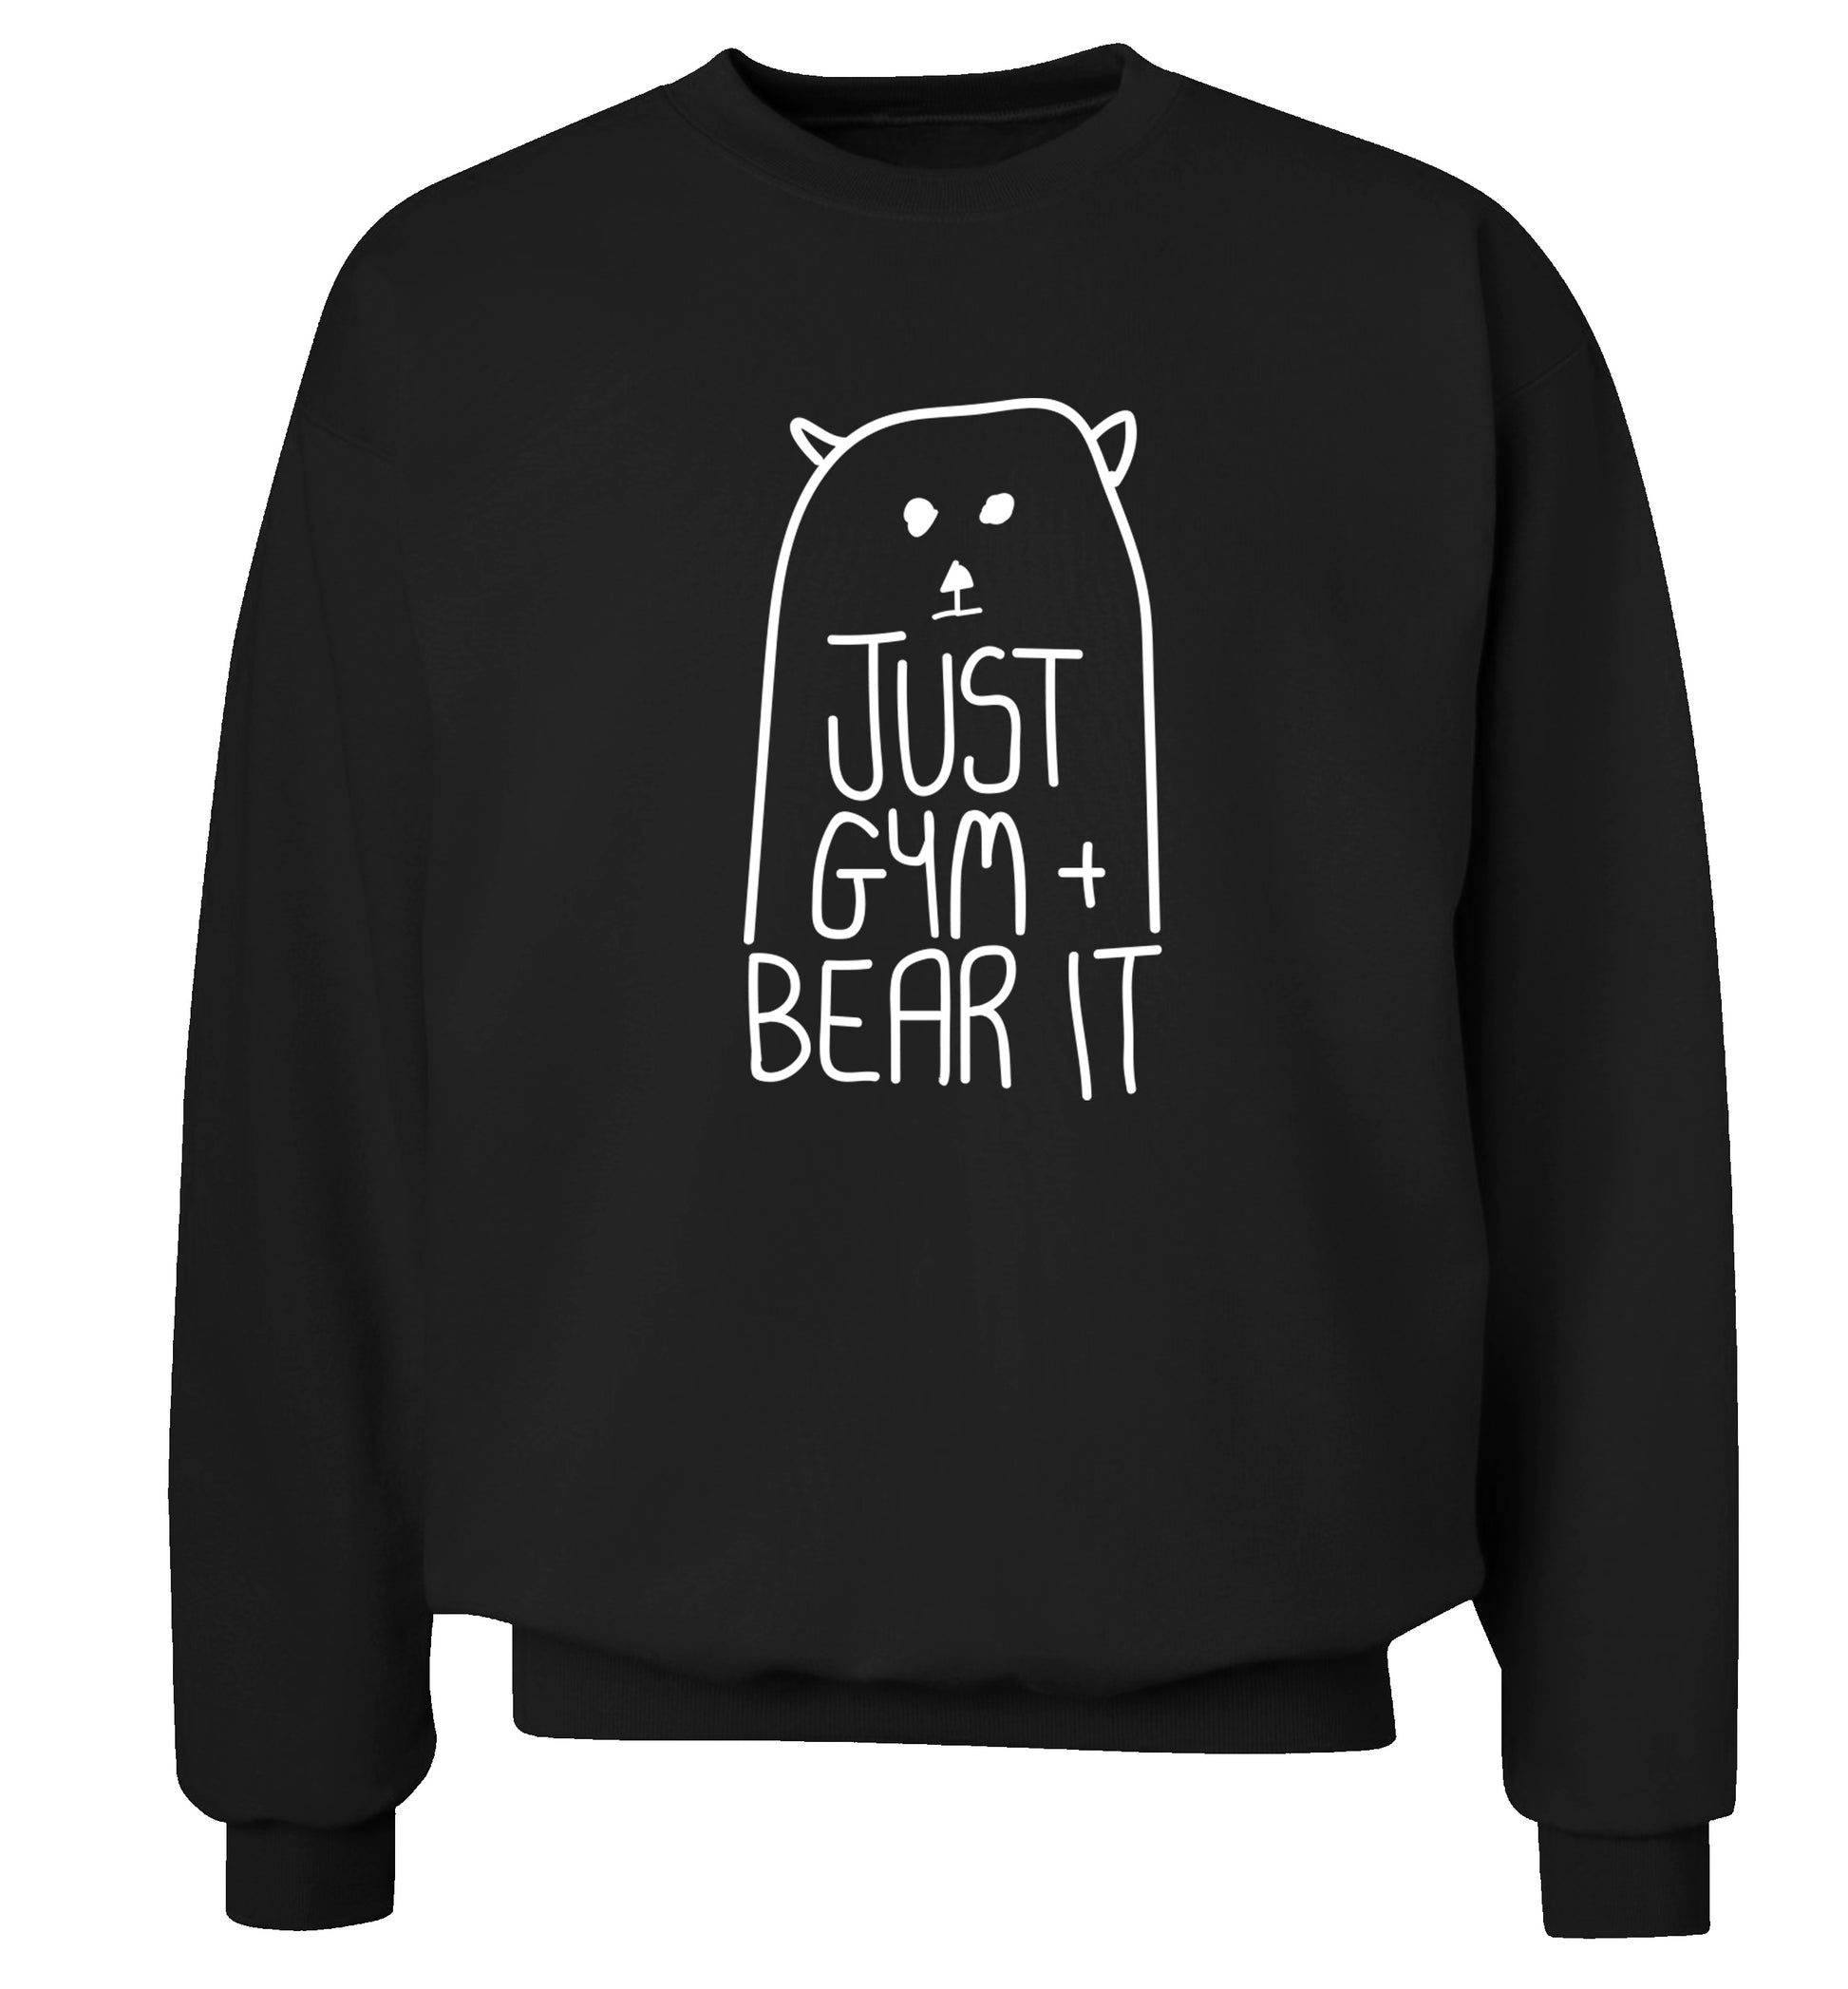 Just gym and bear it Adult's unisex black Sweater 2XL